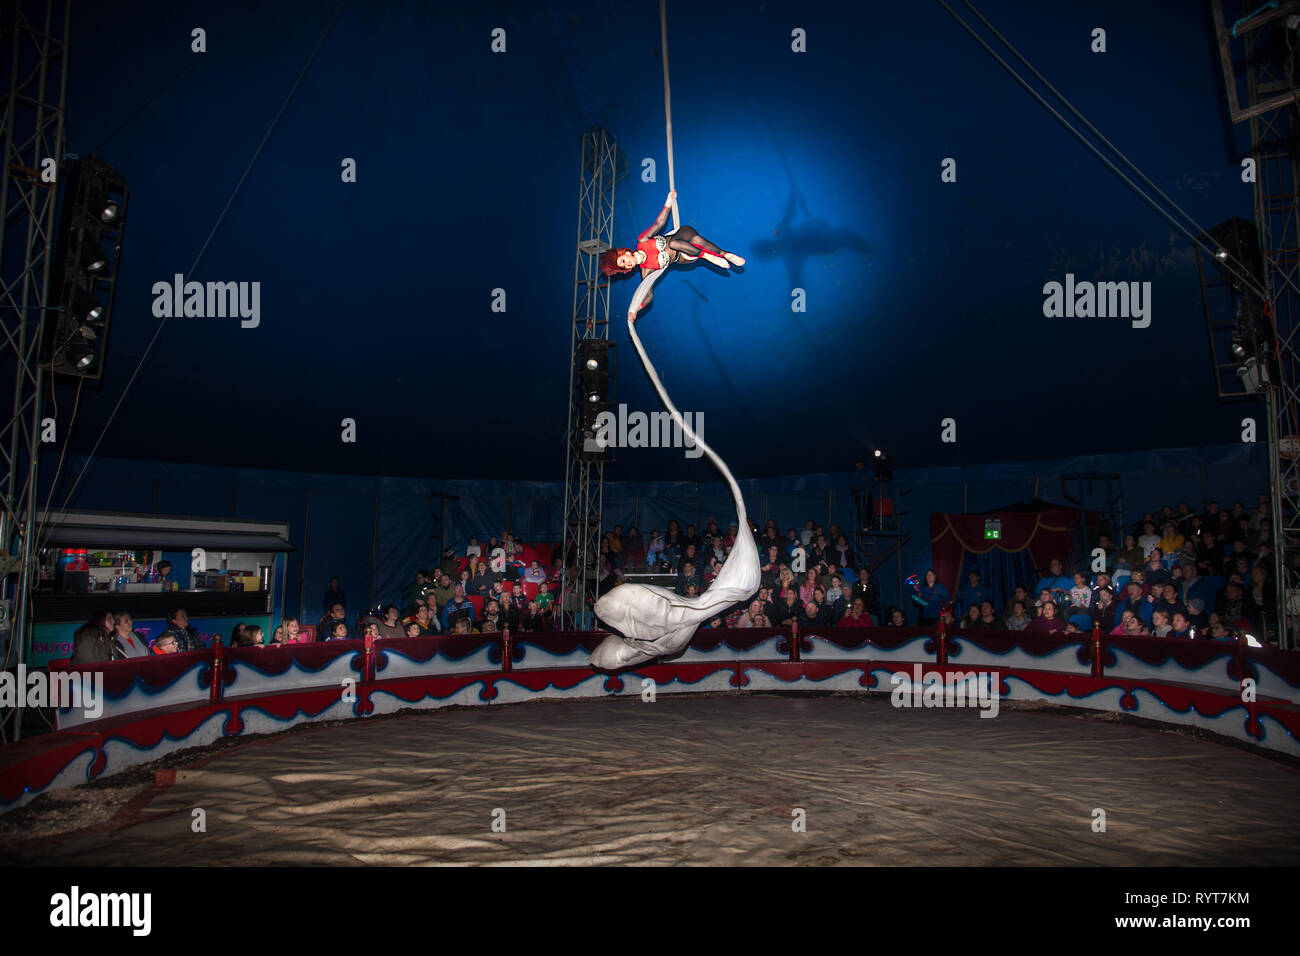 Carrigaline, Cork, Ireland. 14th March, 2019. Talia Hawker performs on the aerial silks during her performance at Circus Gerbola  which is performing until Monday in Carrigaline, Co. Cork, Ireland. Credit: David Creedon/Alamy Live News Stock Photo